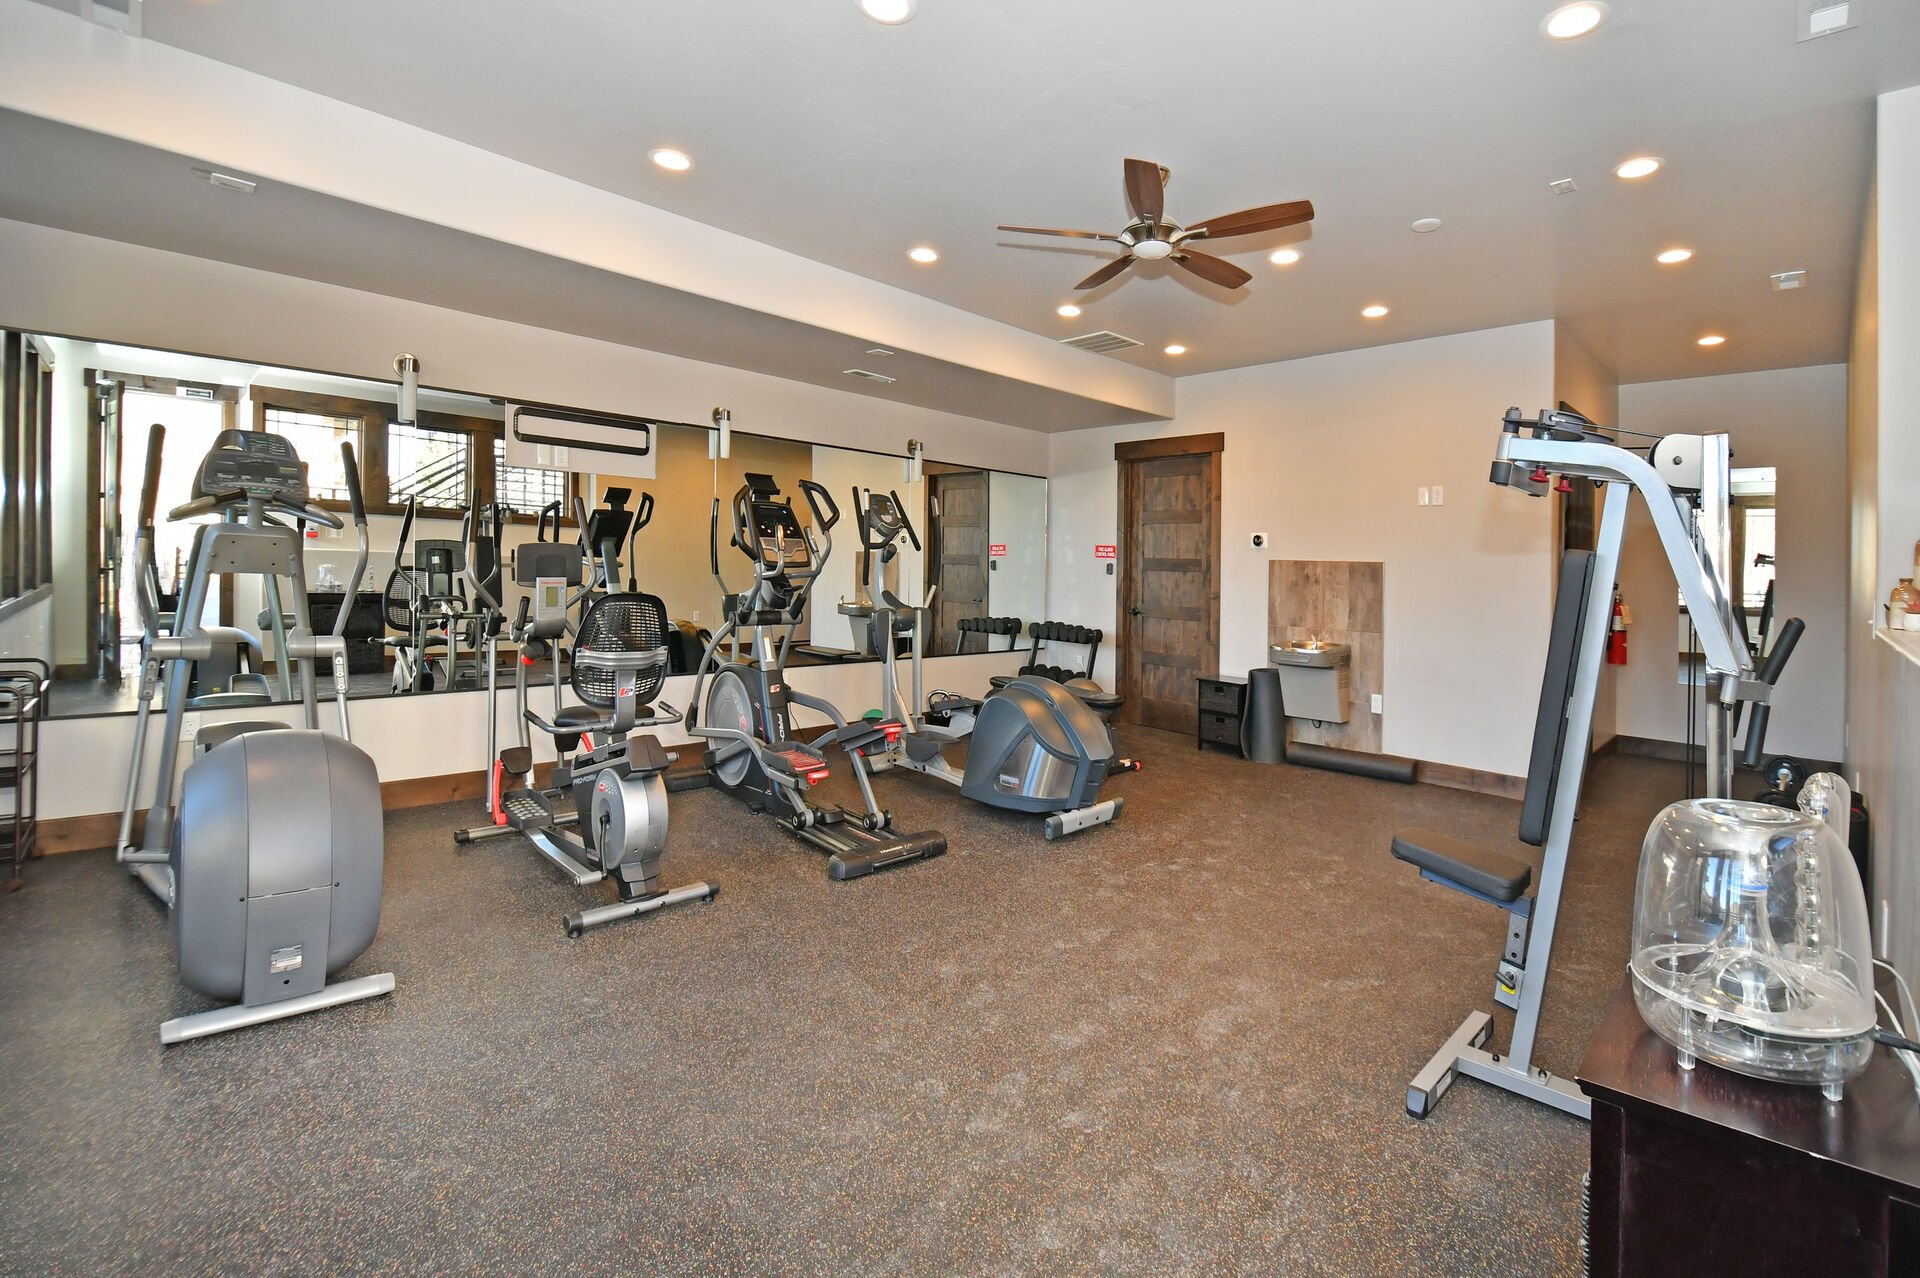 Community gym for guest use